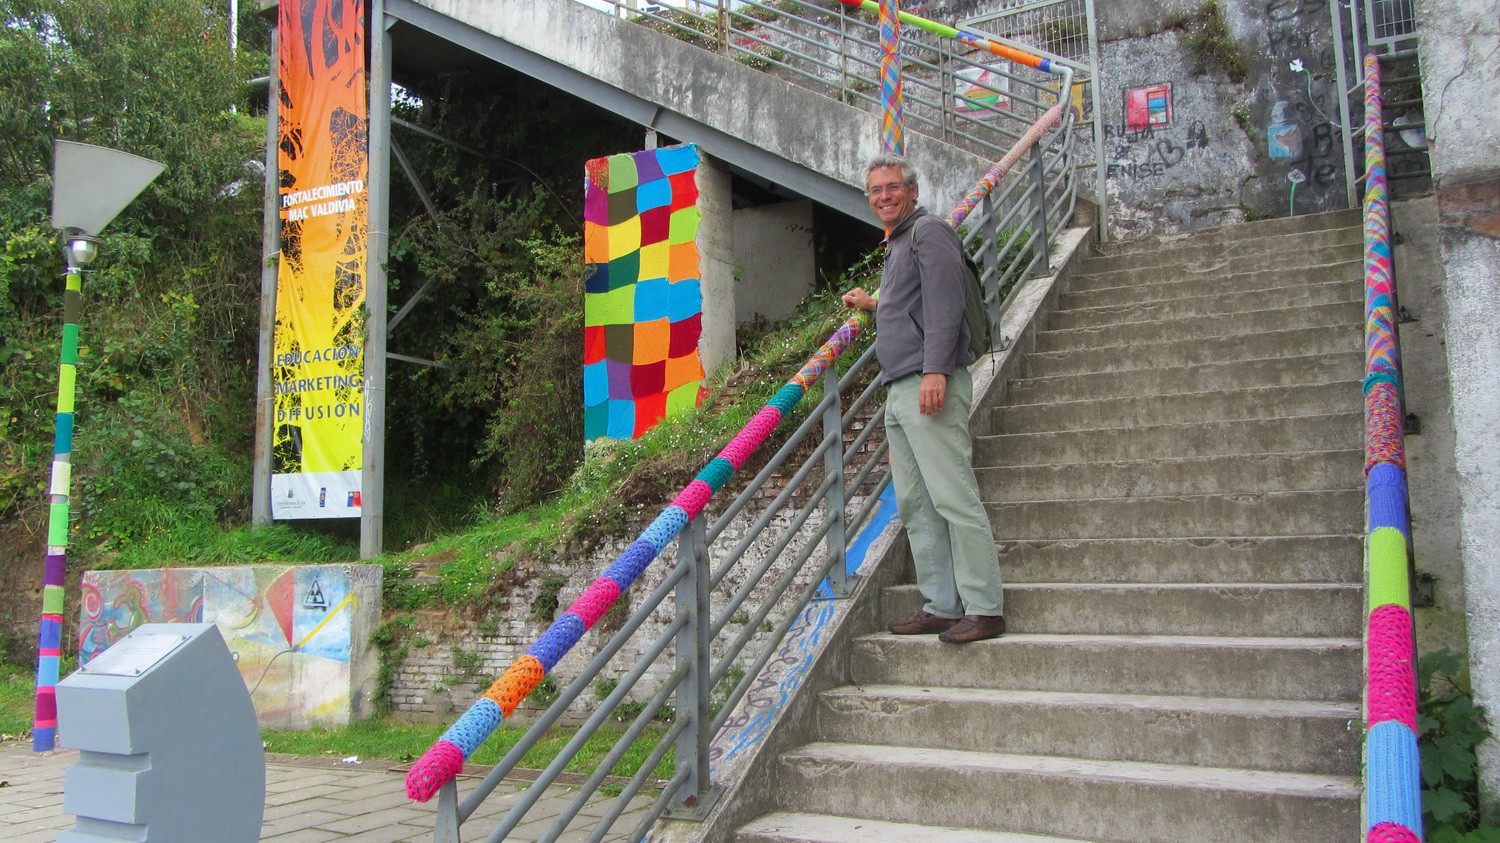 Railings decorated with woolen bands